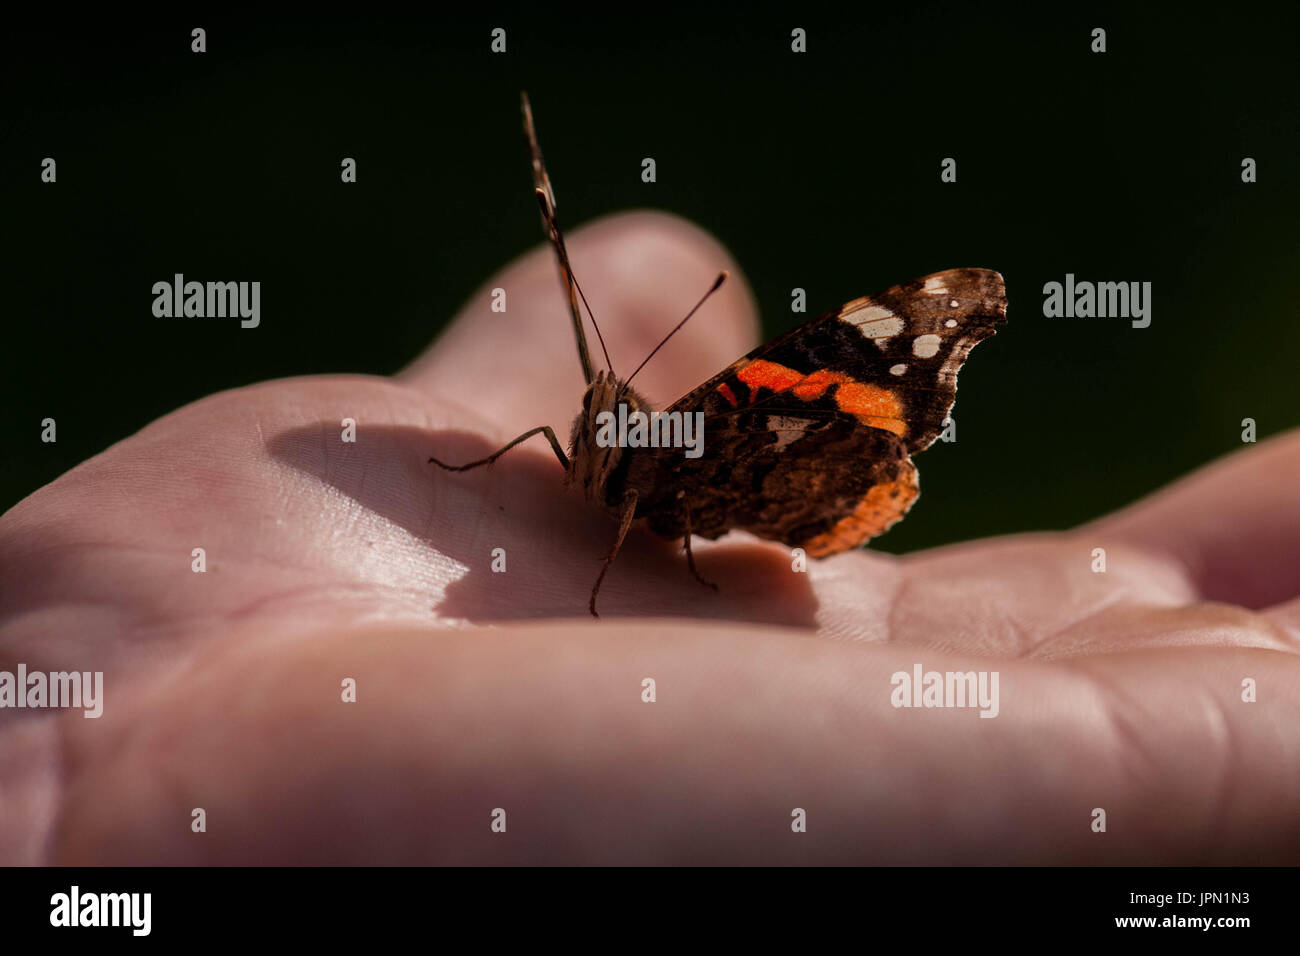 Red Admiral Butterfly on Hand Stock Photo